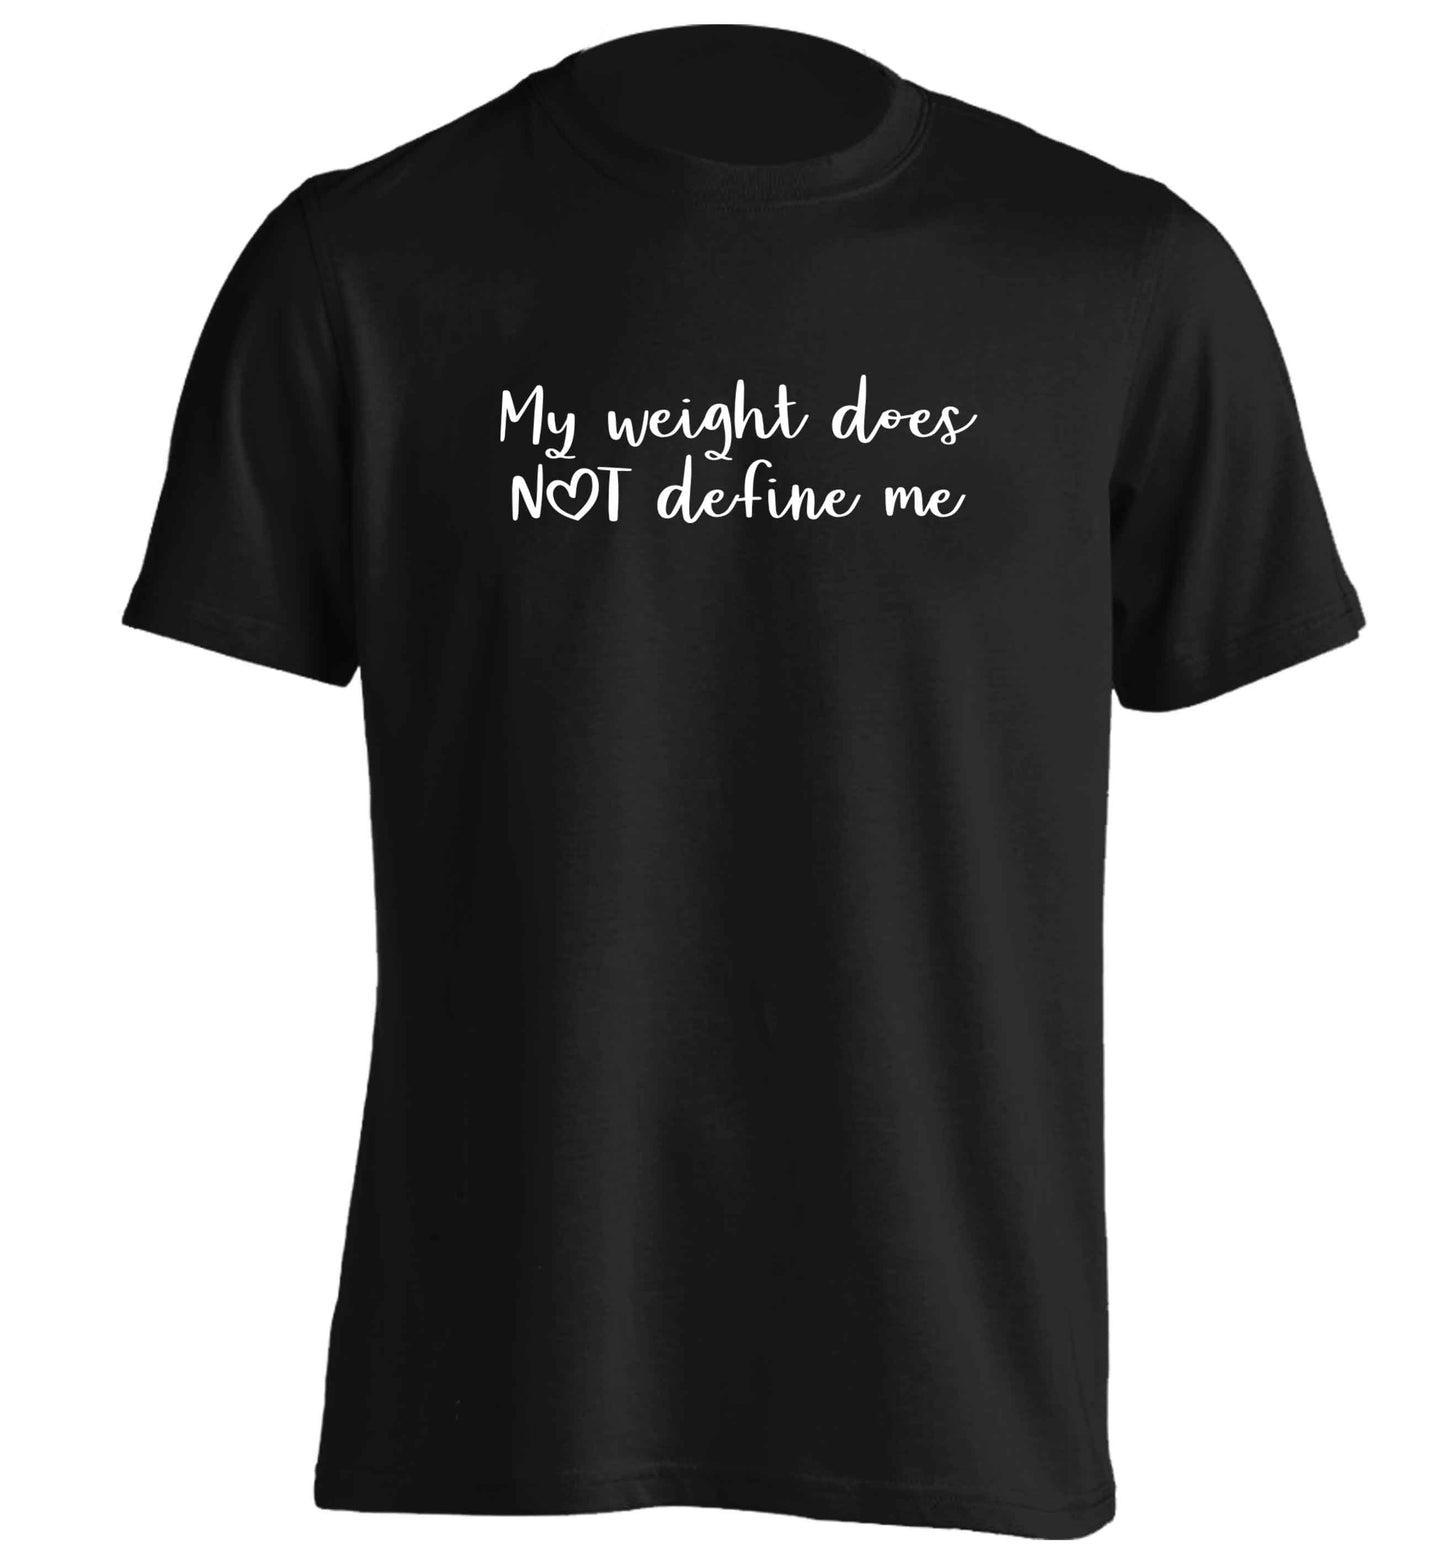 My weight does not define me adults unisex black Tshirt 2XL